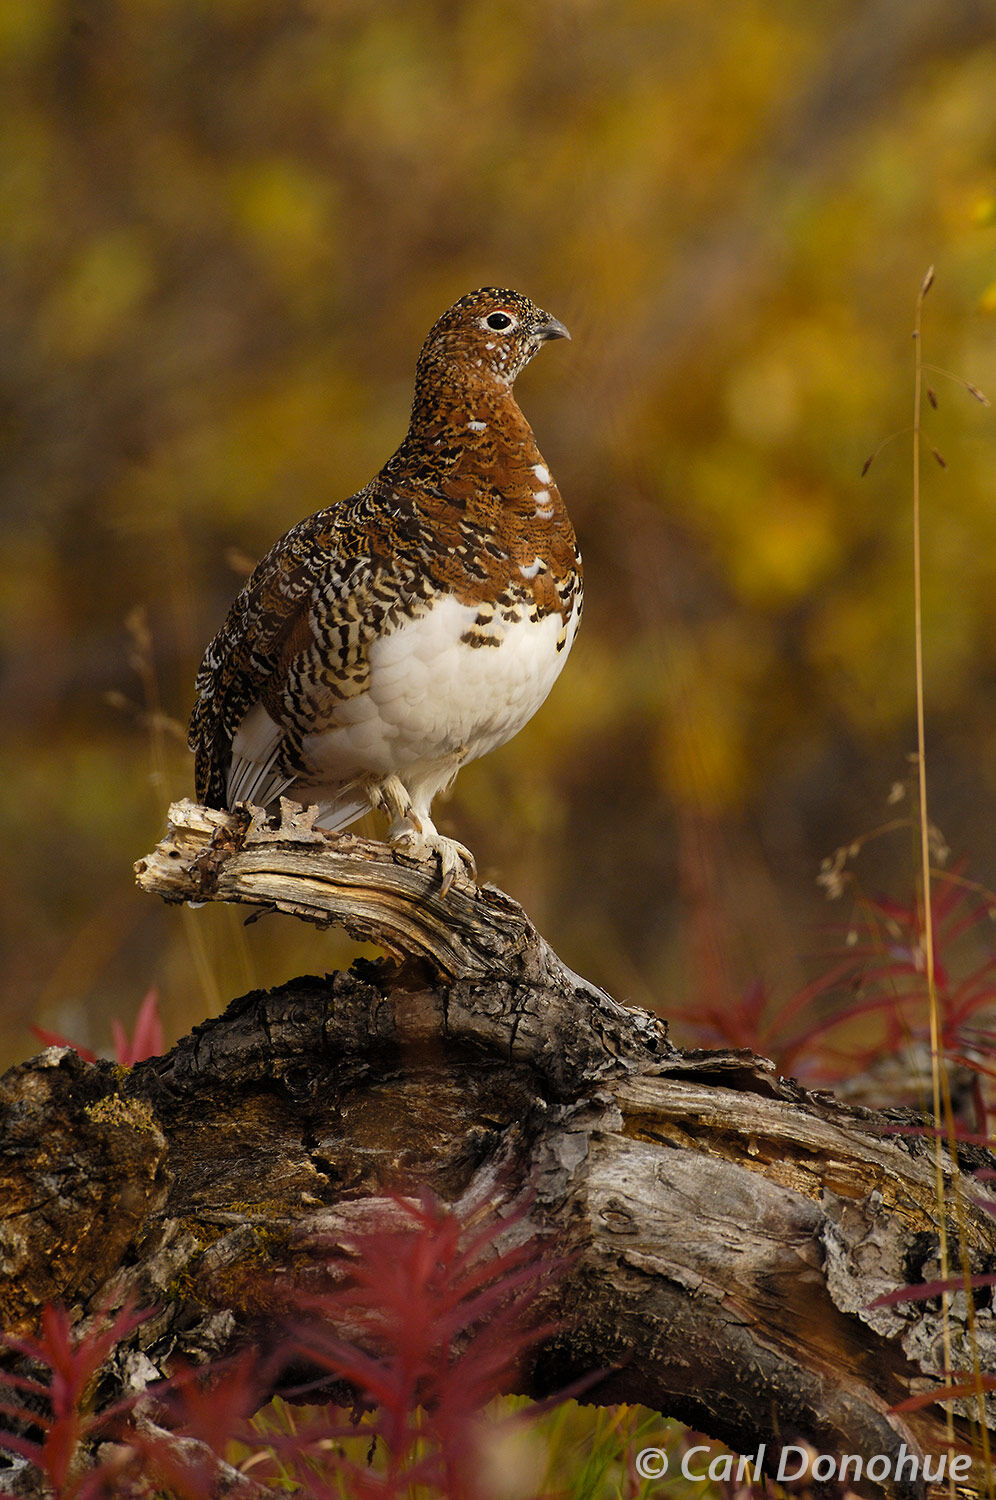 The willow Ptarmigan is Alaska's state bird, and very common throughout much of the state.  This female is changing from summer...